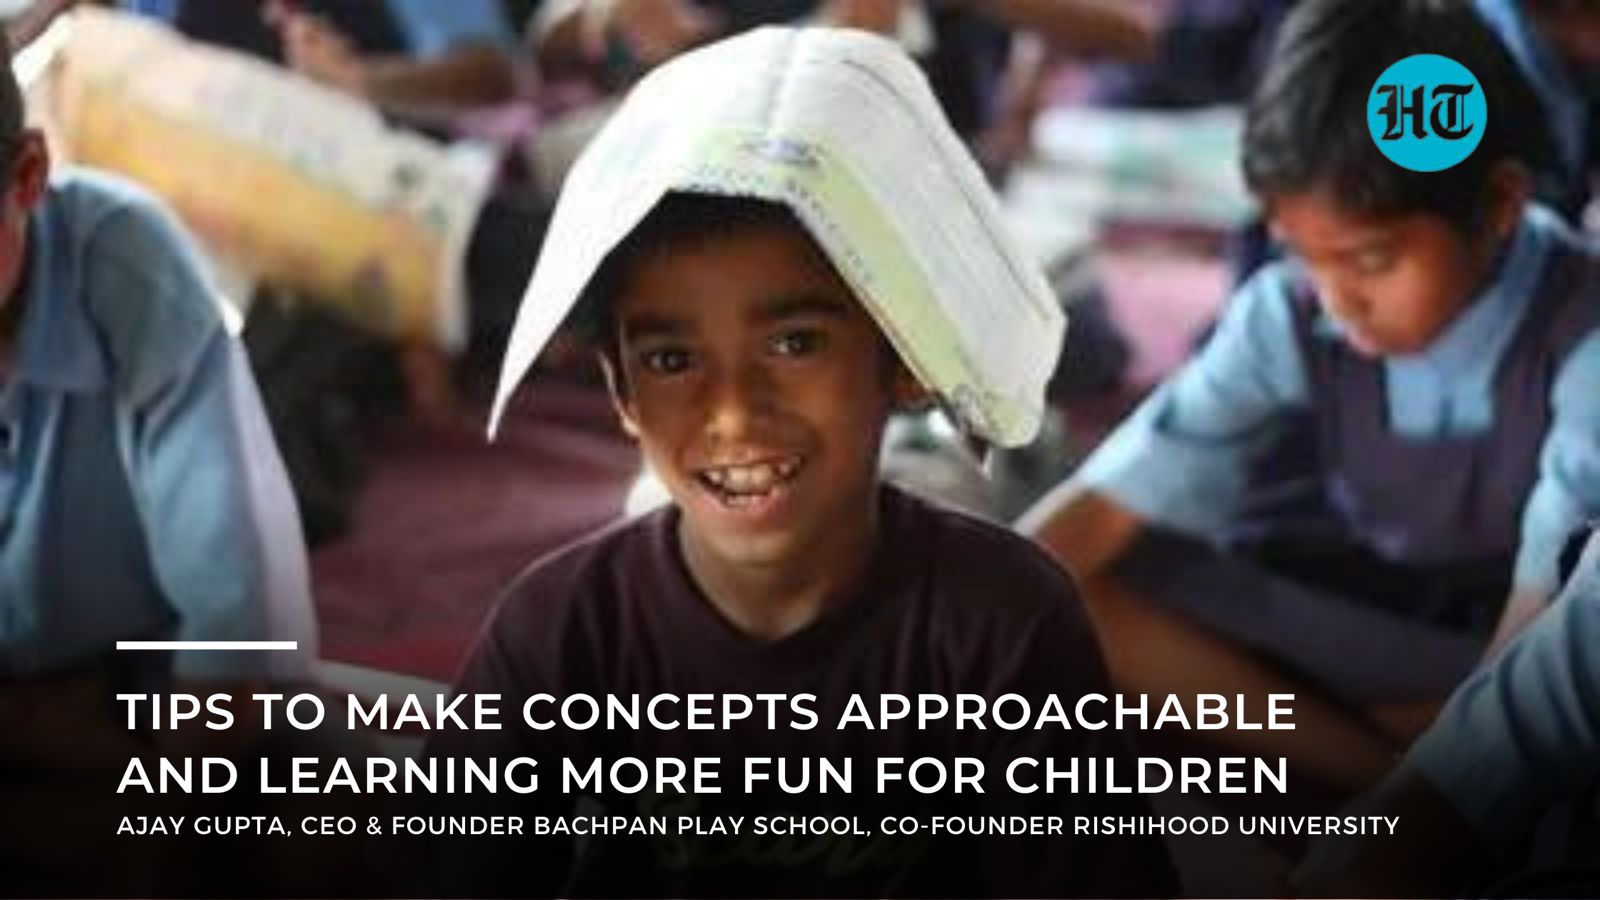 Tips to make concepts approachable and learning more fun for children